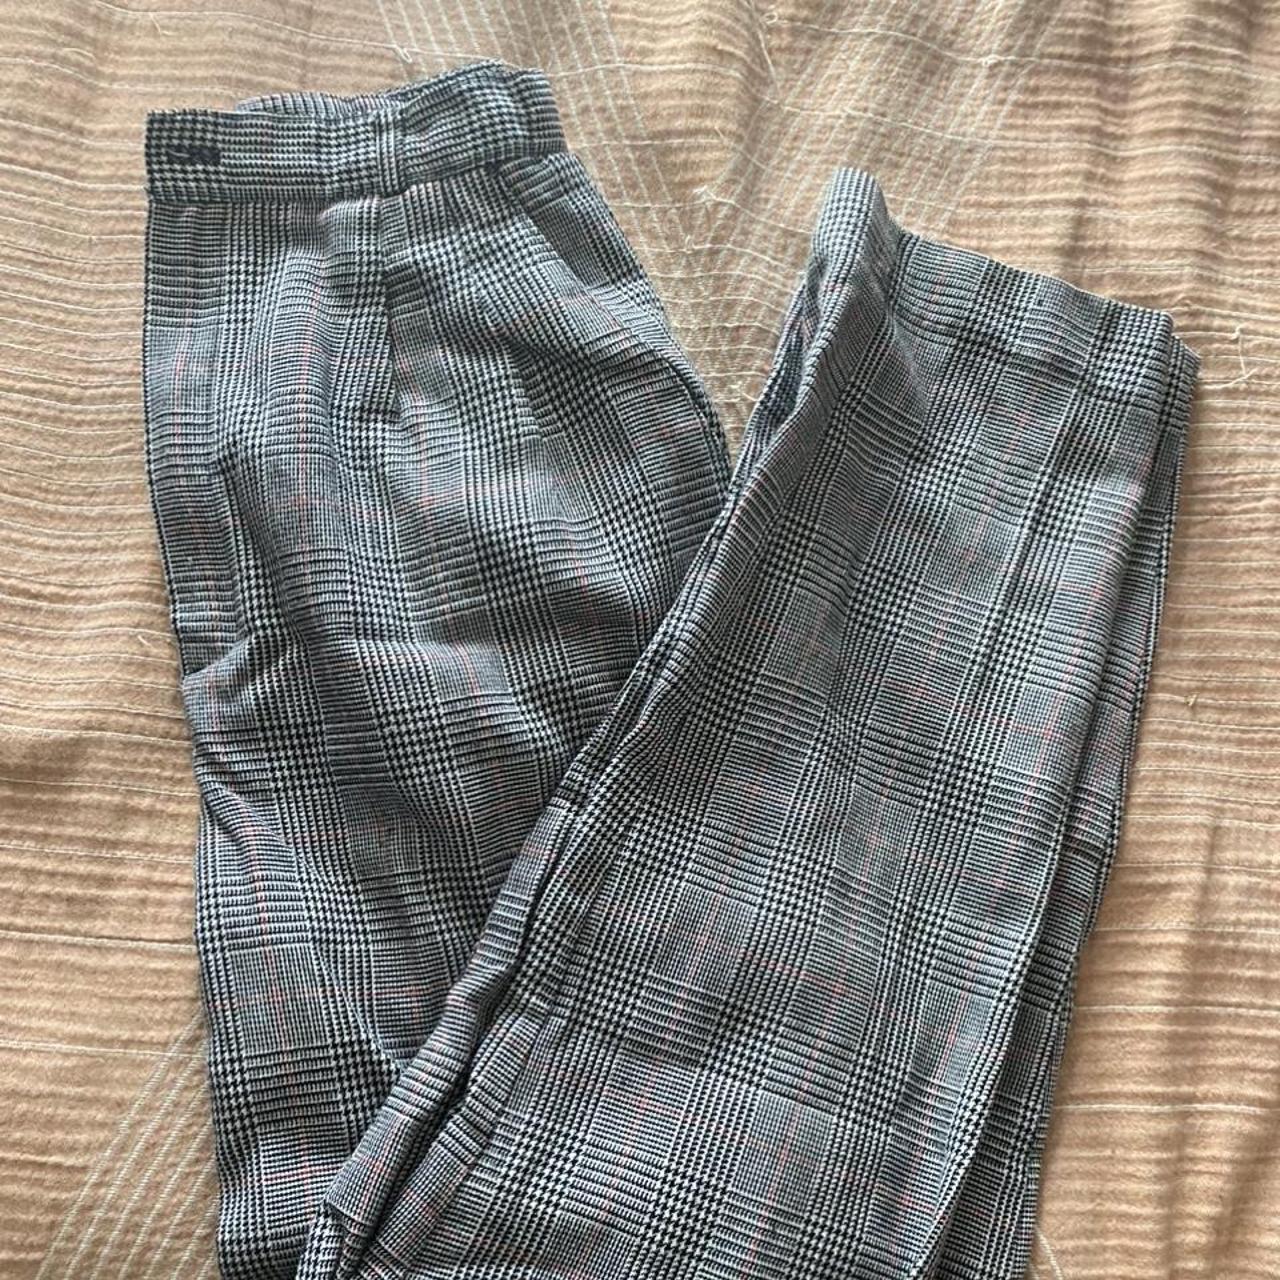 Plaid business pants 24 inch waist, stretches to 26... - Depop